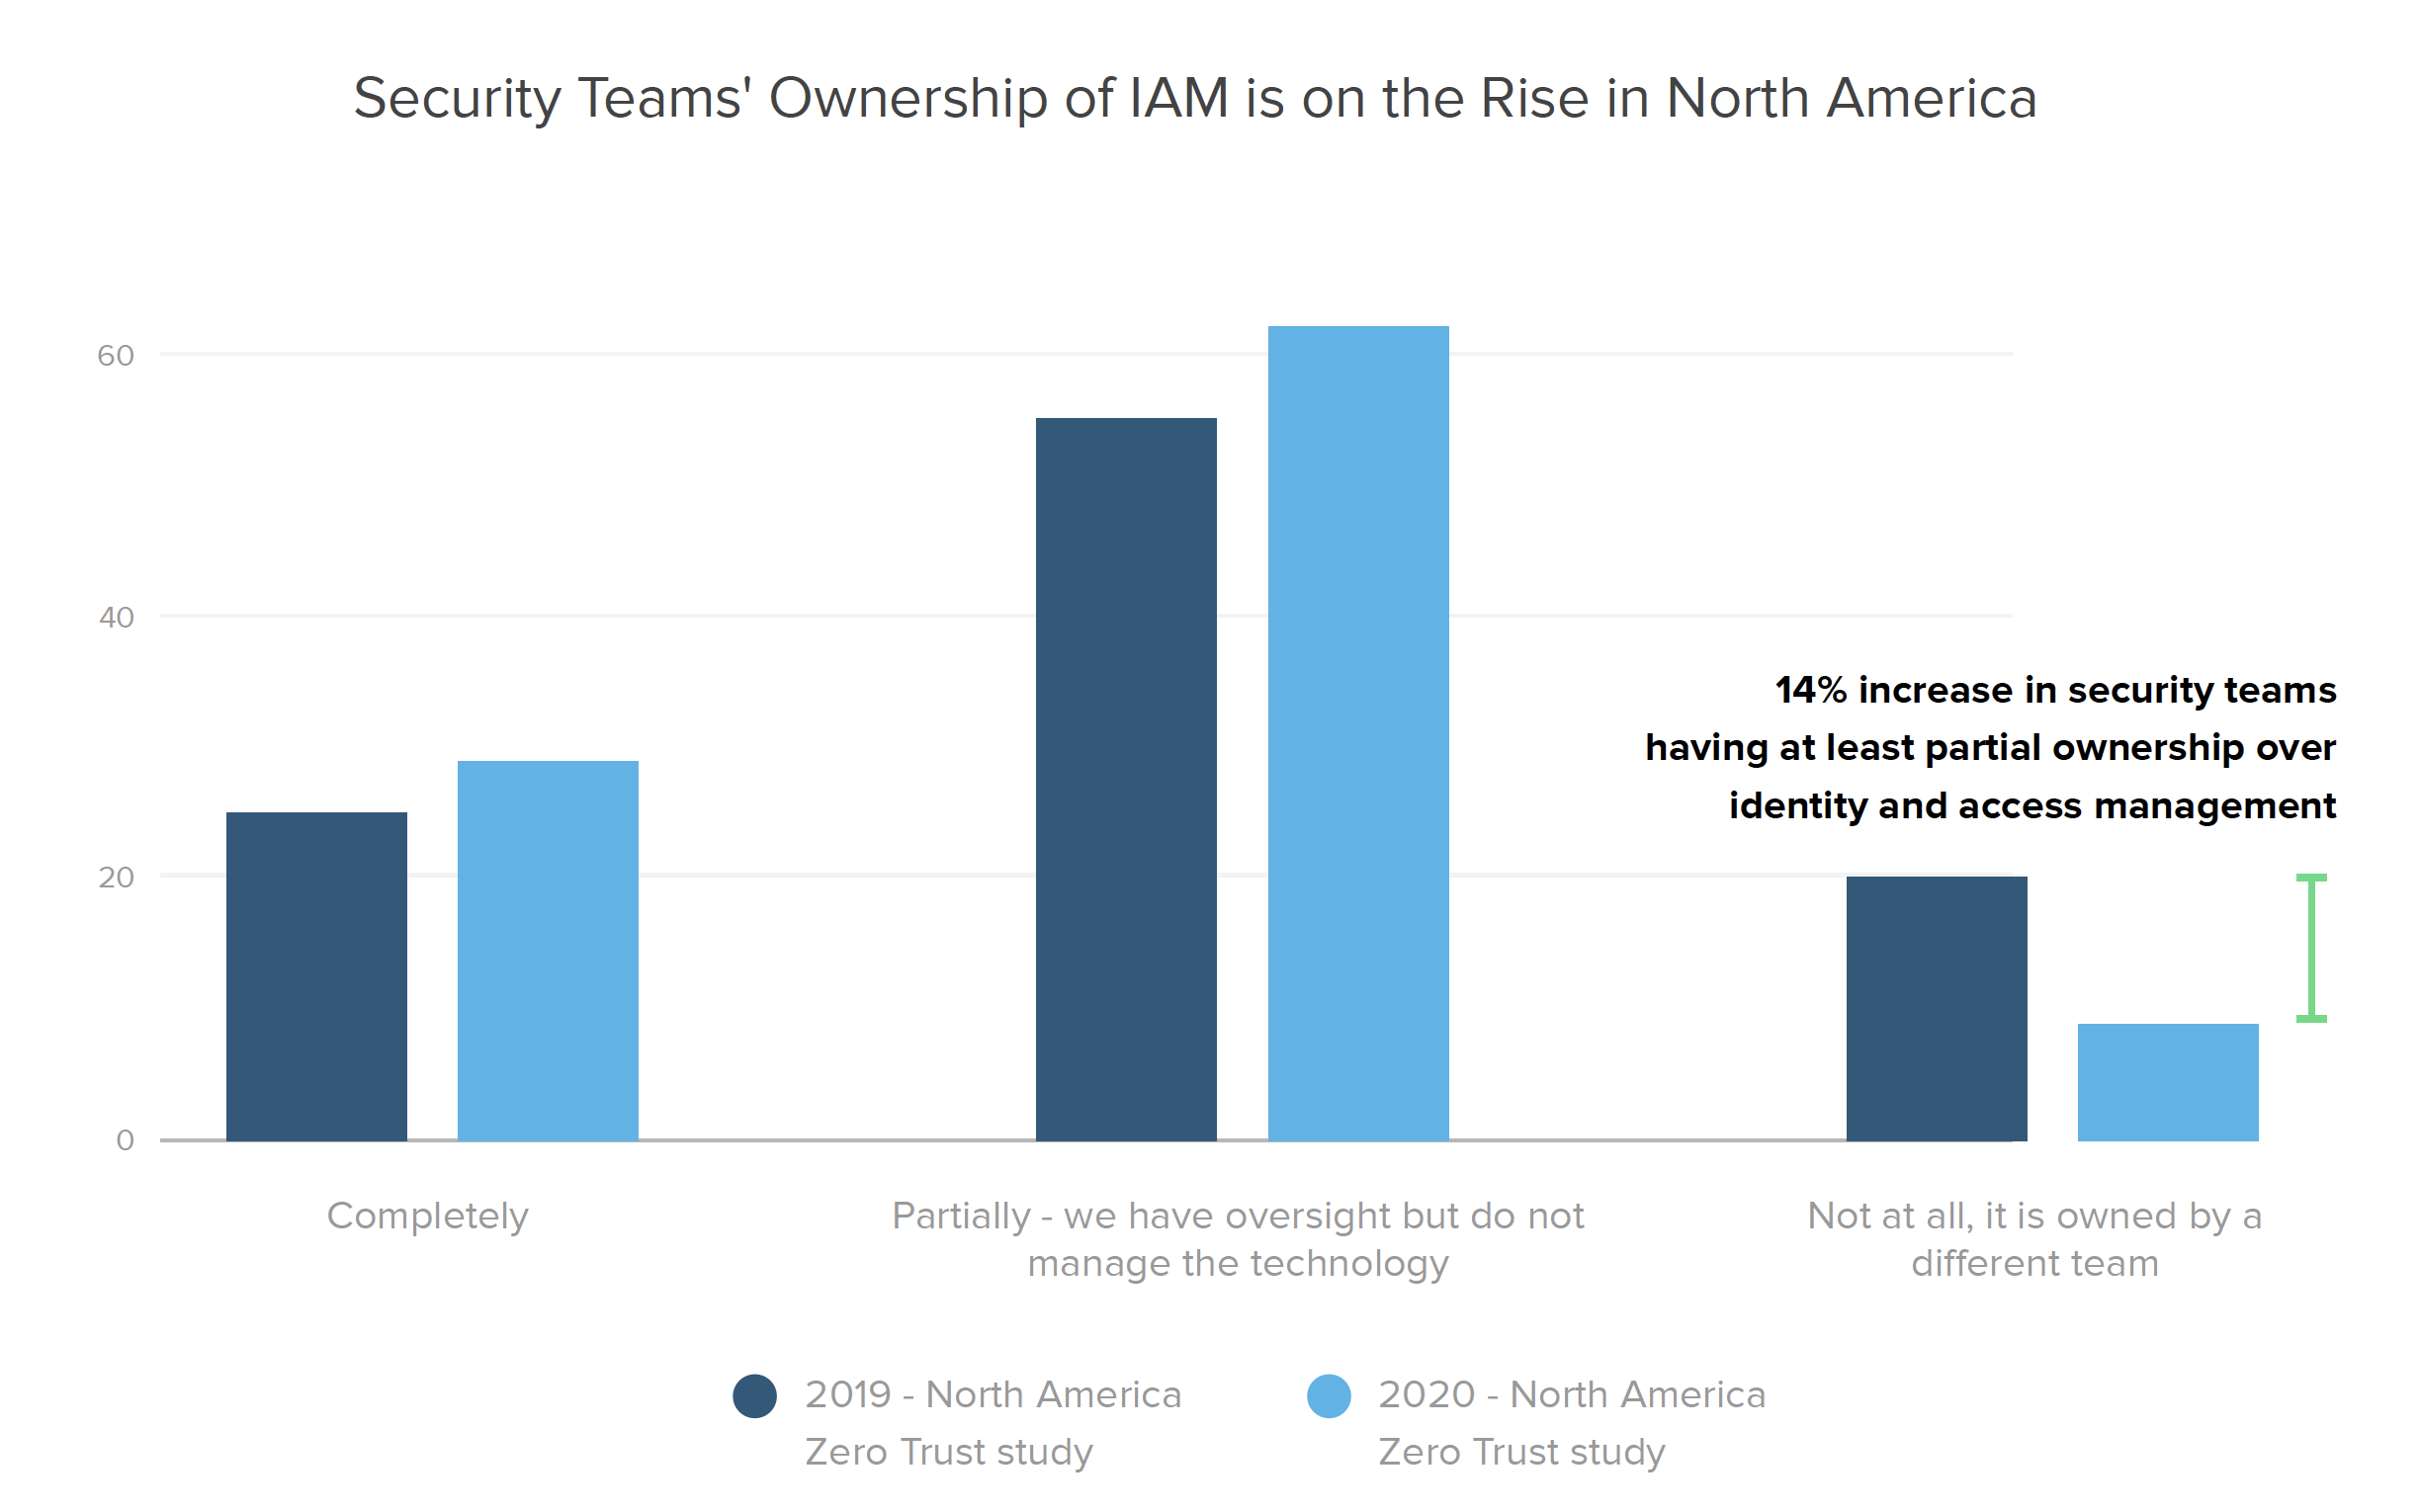 Security Teams' Ownership of IAM is on the Rise in North America